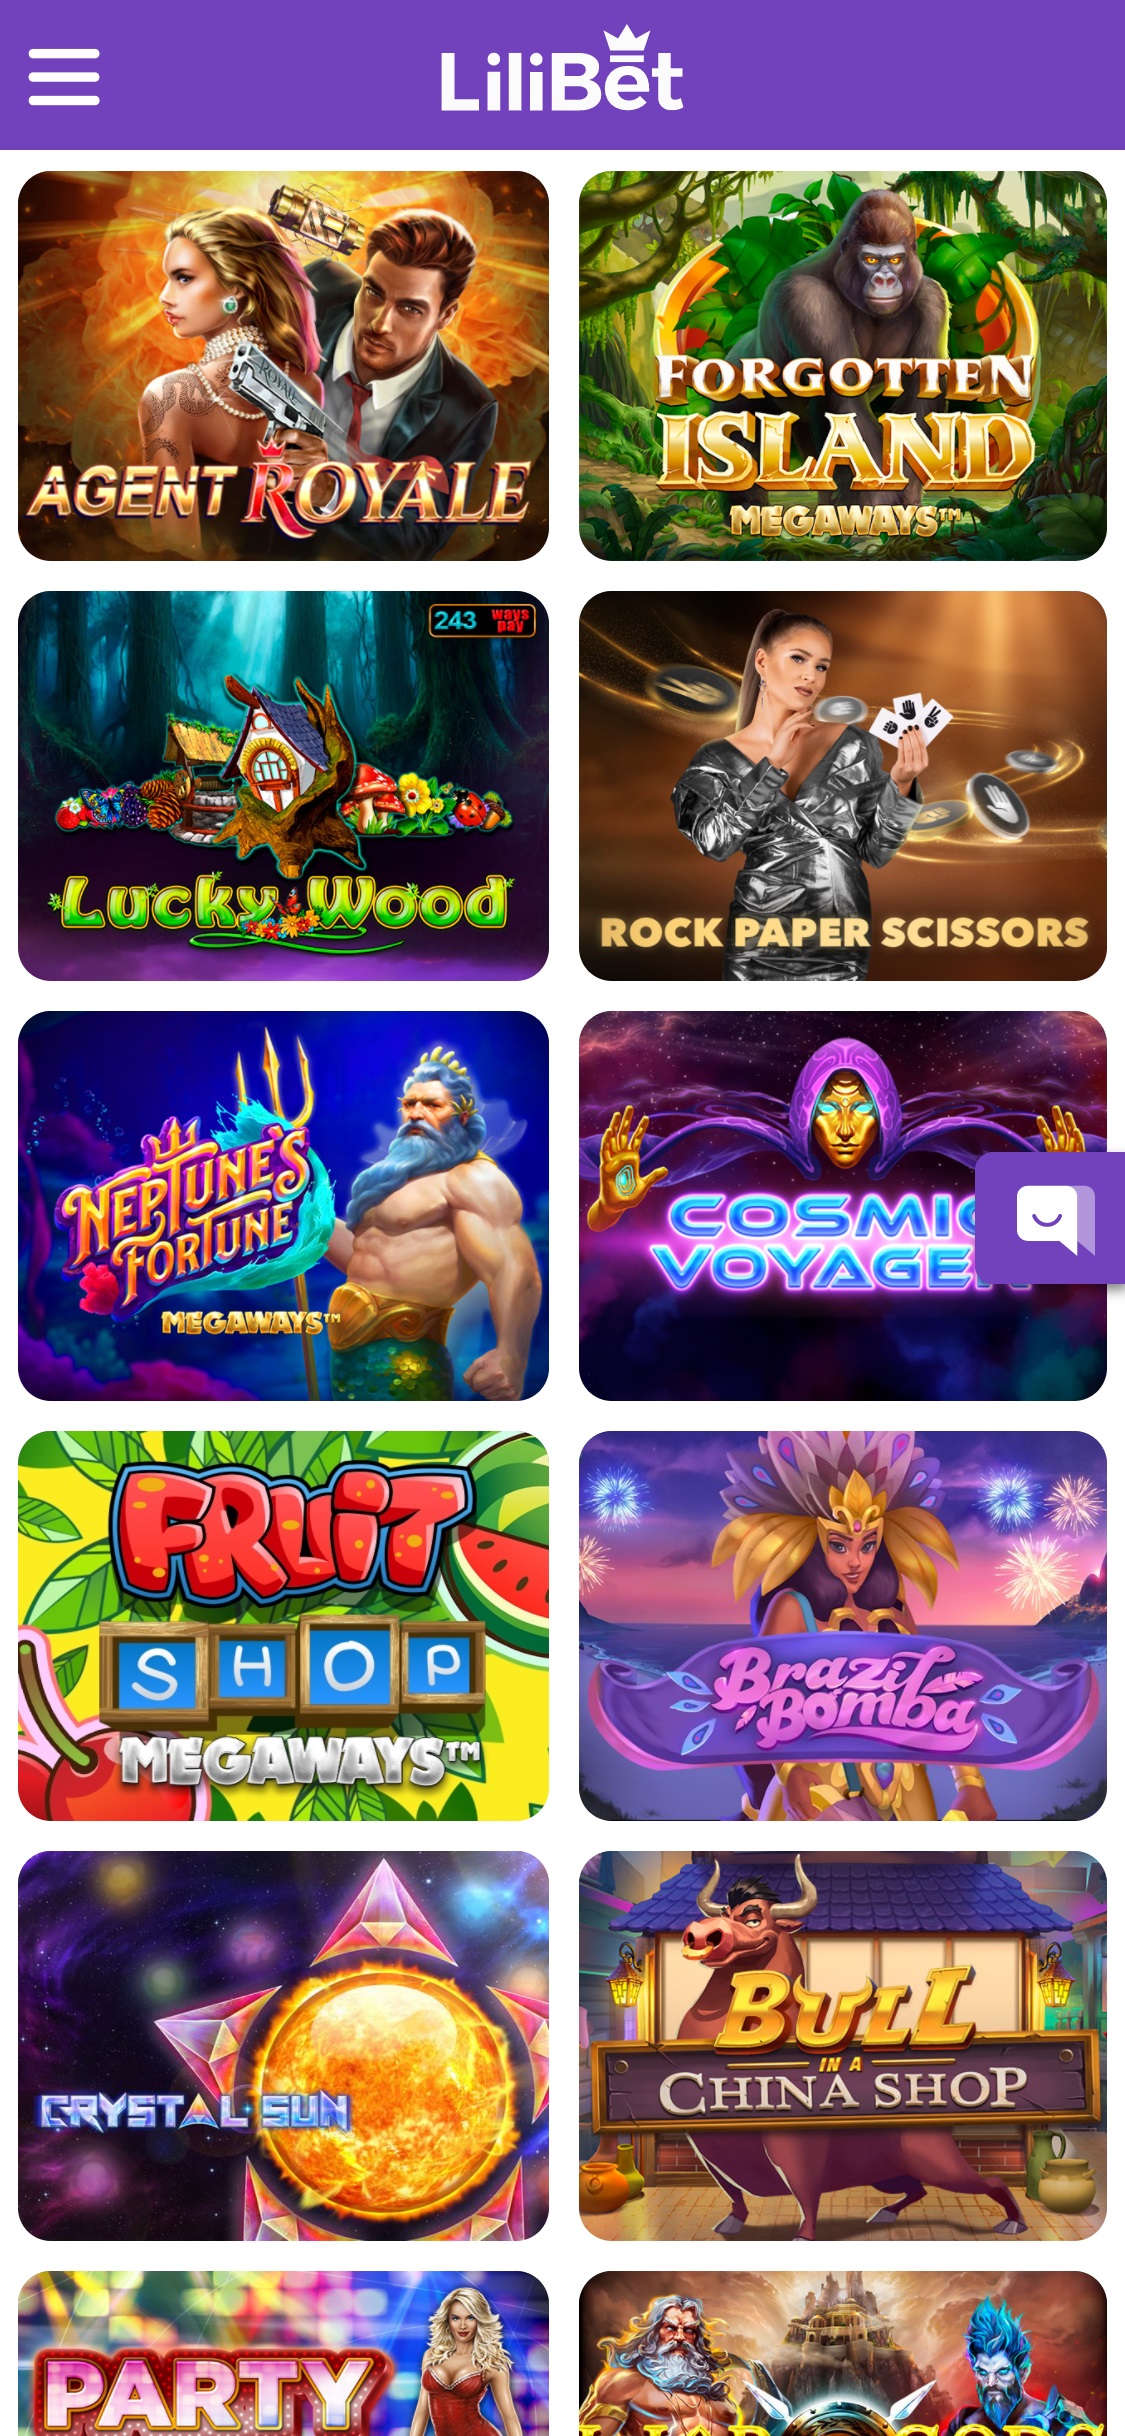 Lilibet Casino Mobile Games Review